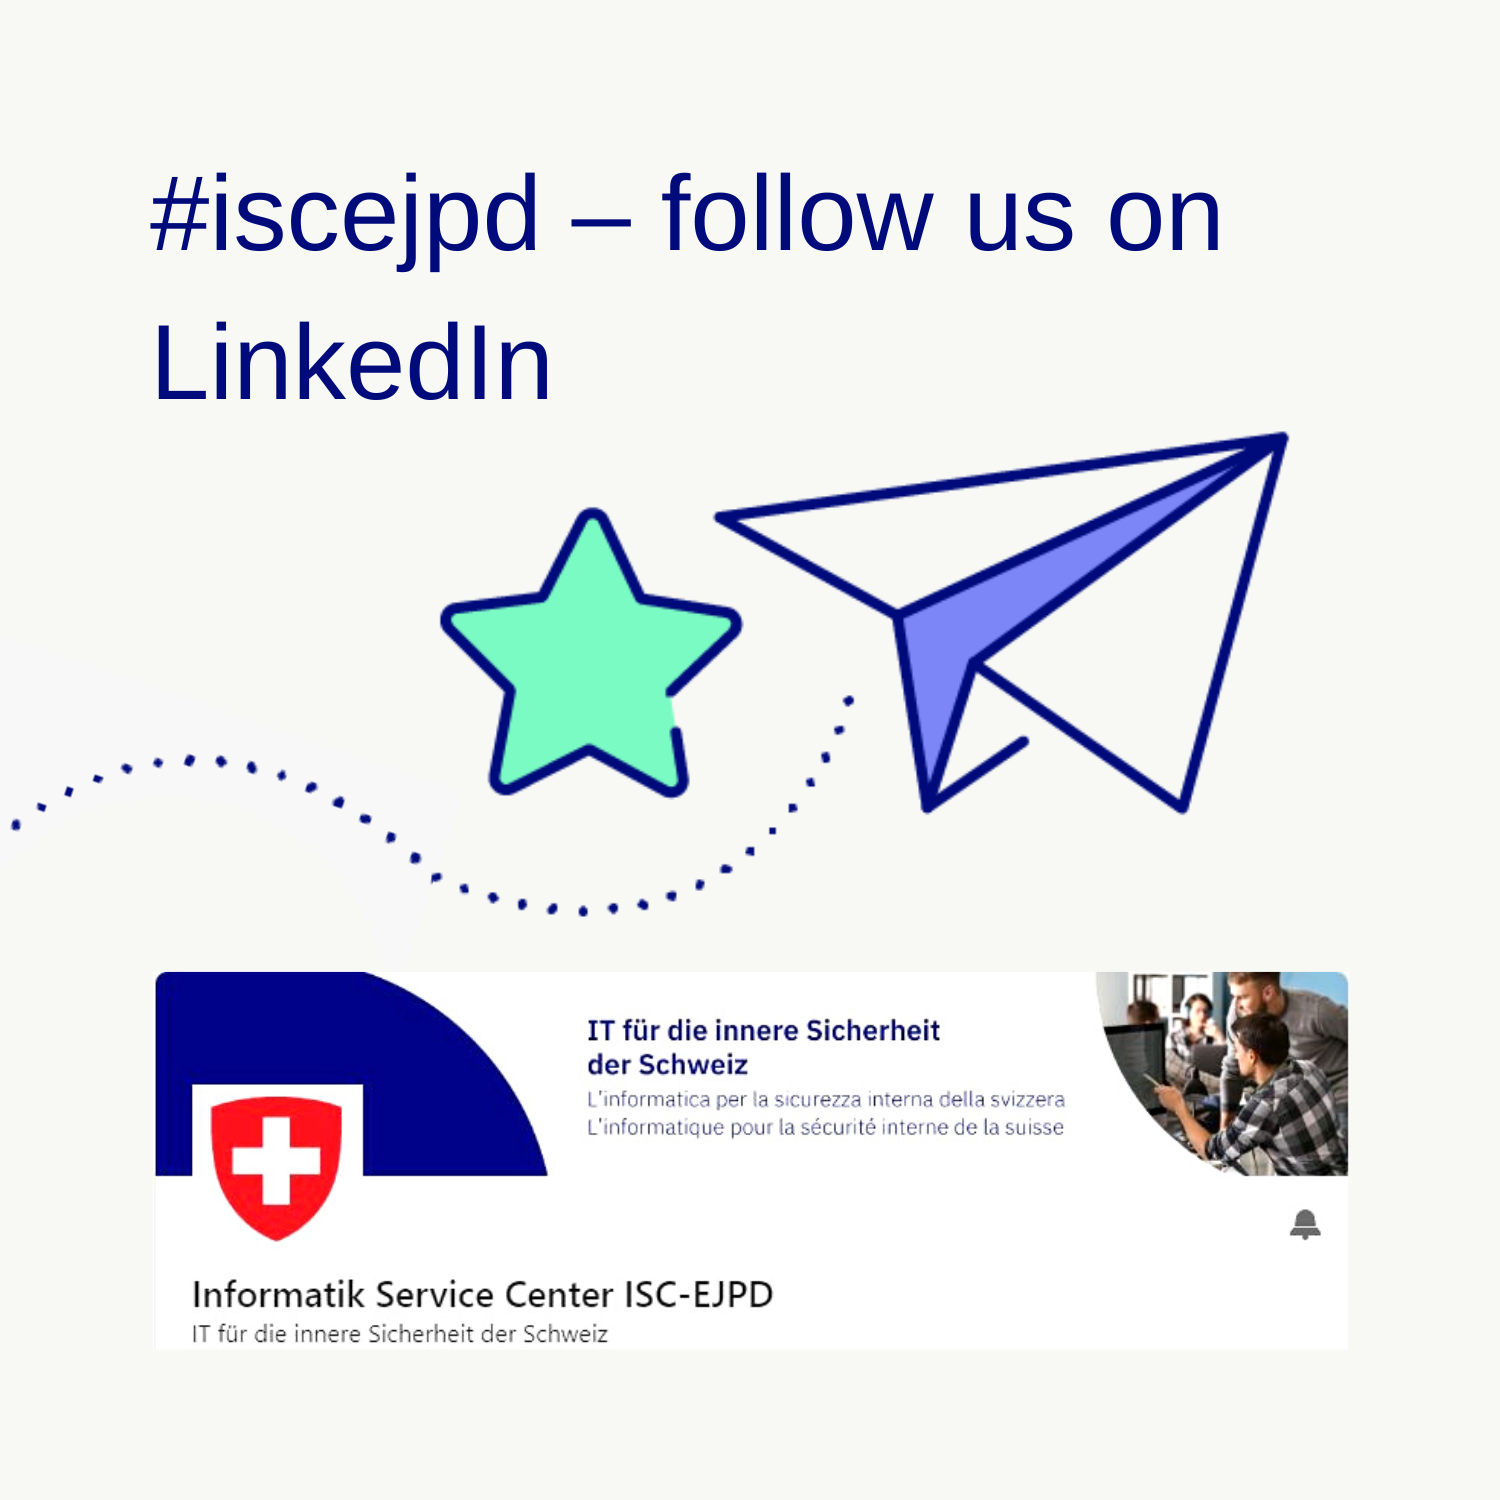 Symbolic image of the LinkedIn channel of the ISC-FDJP and advice to follow this channel